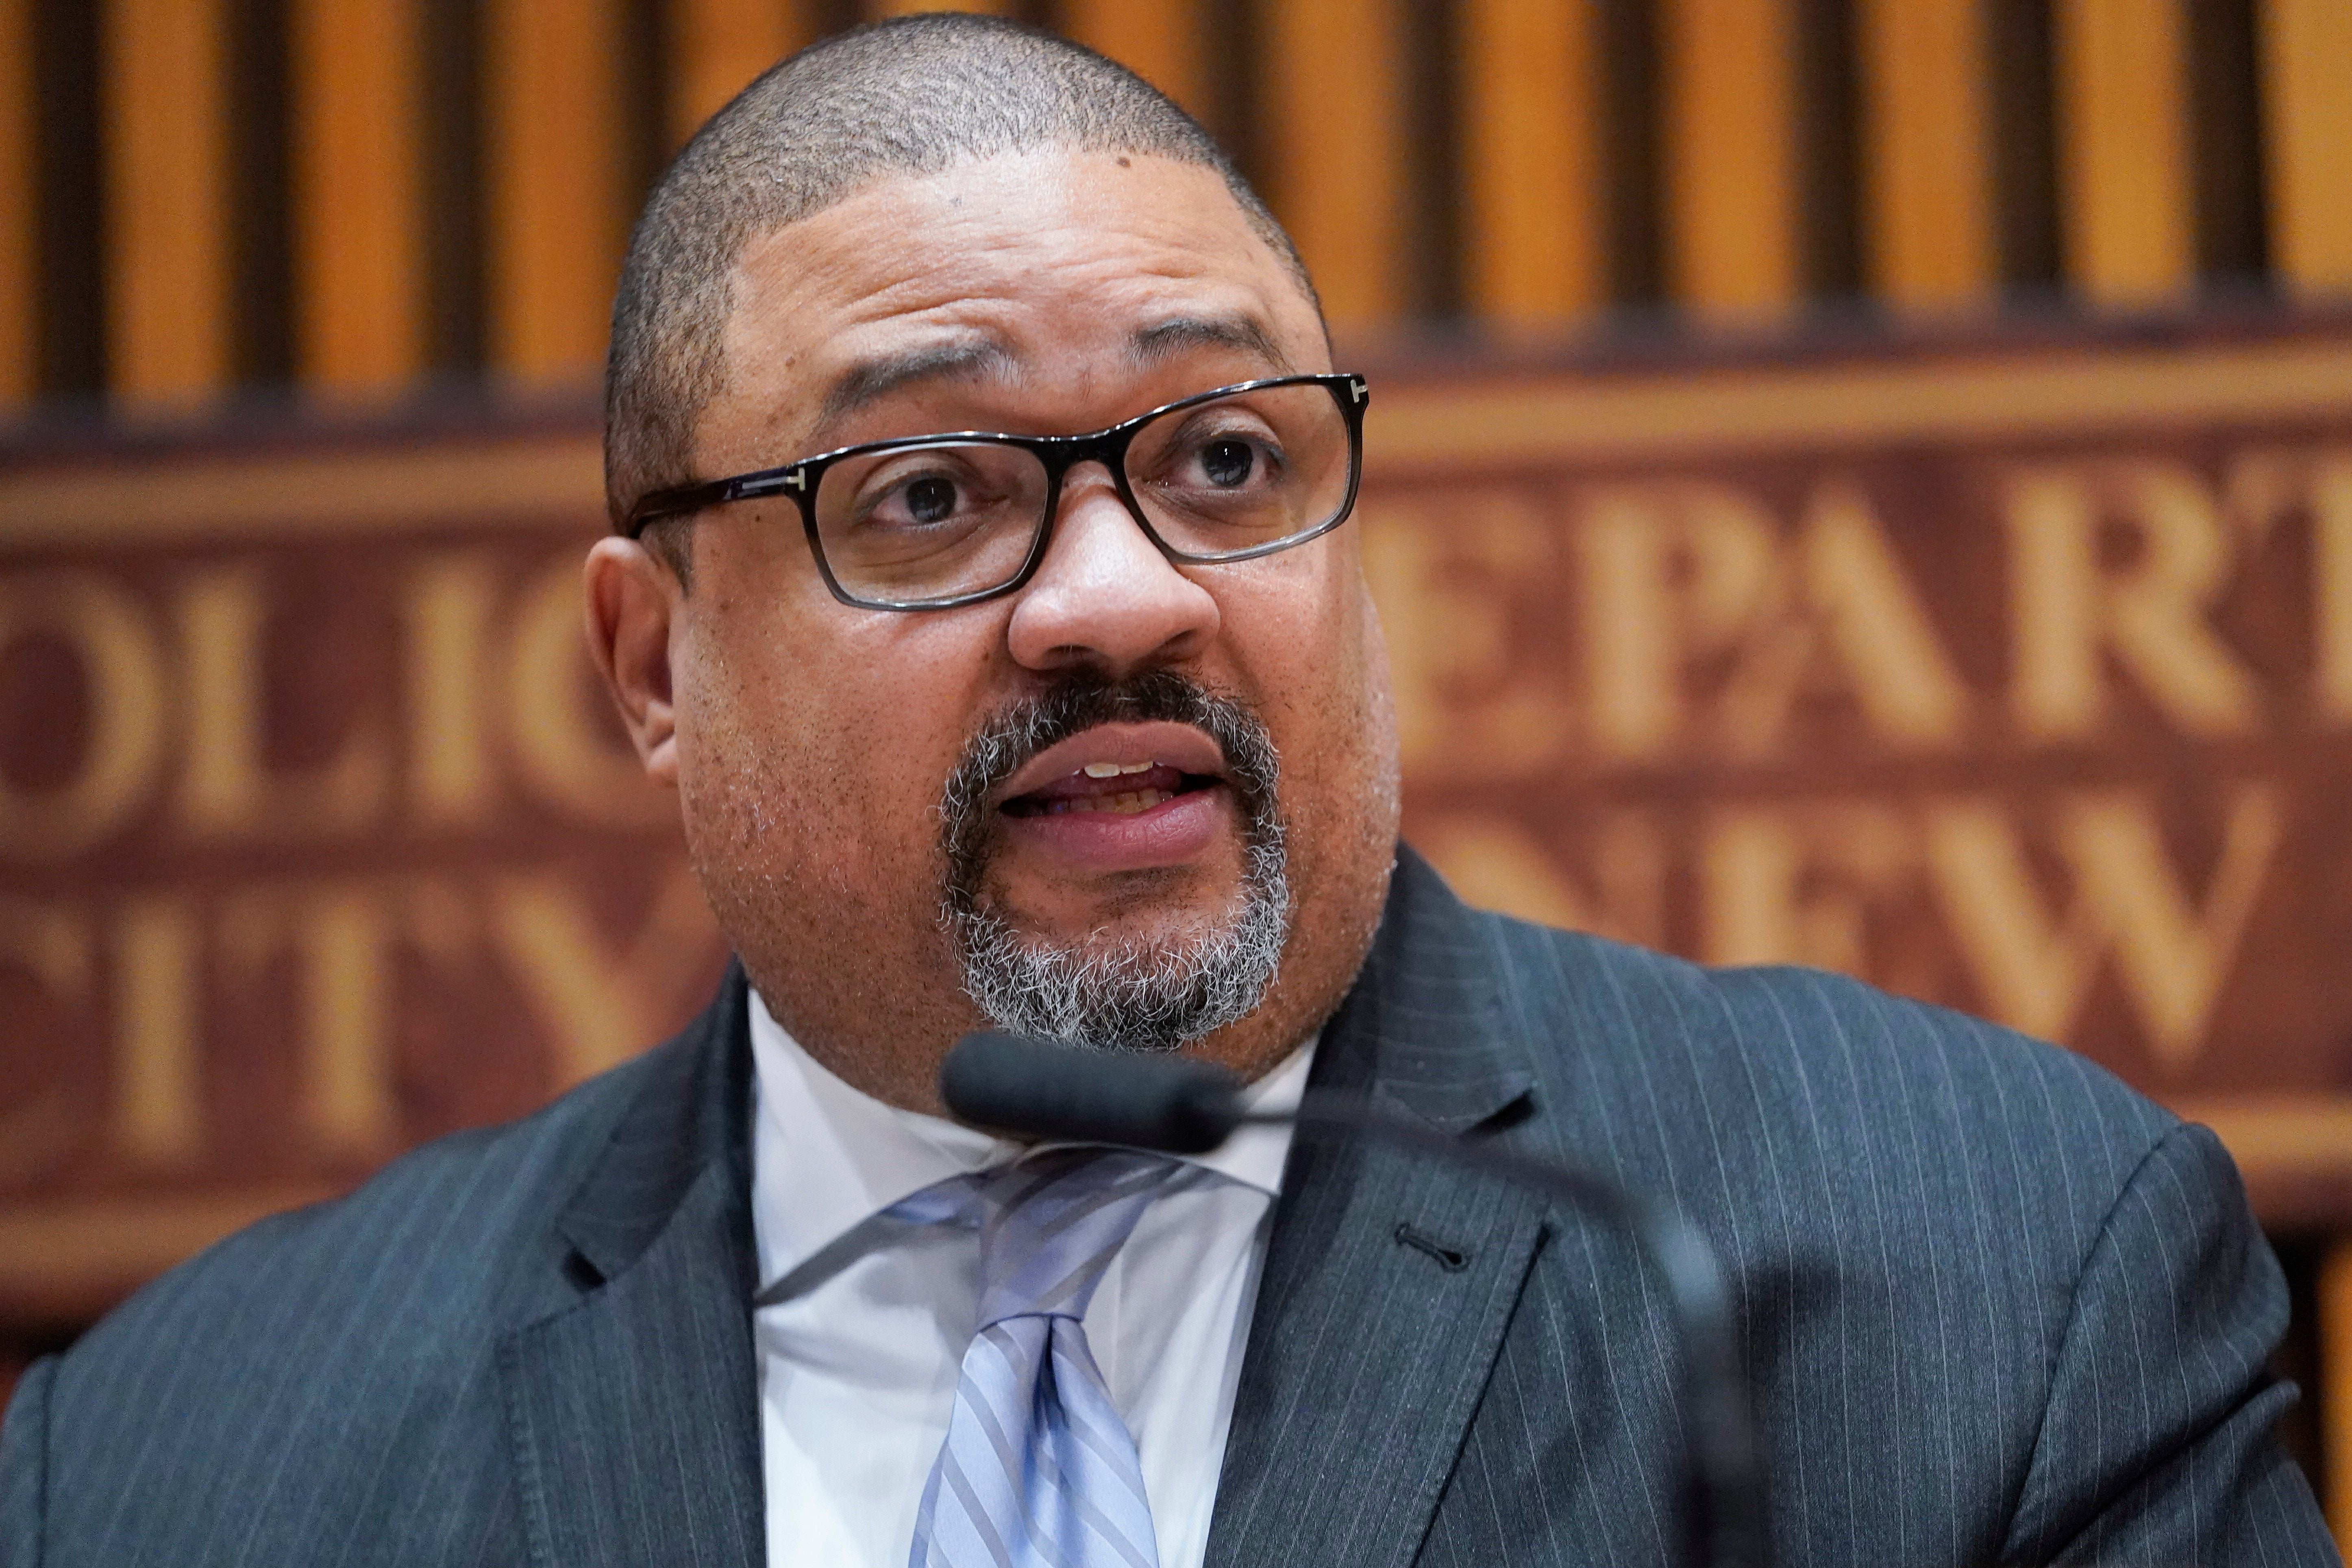 Manhattan District Attorney Alvin Bragg has agreed to give testimony to the House Judiciary Committee regarding Donald Trump’s hush money trial